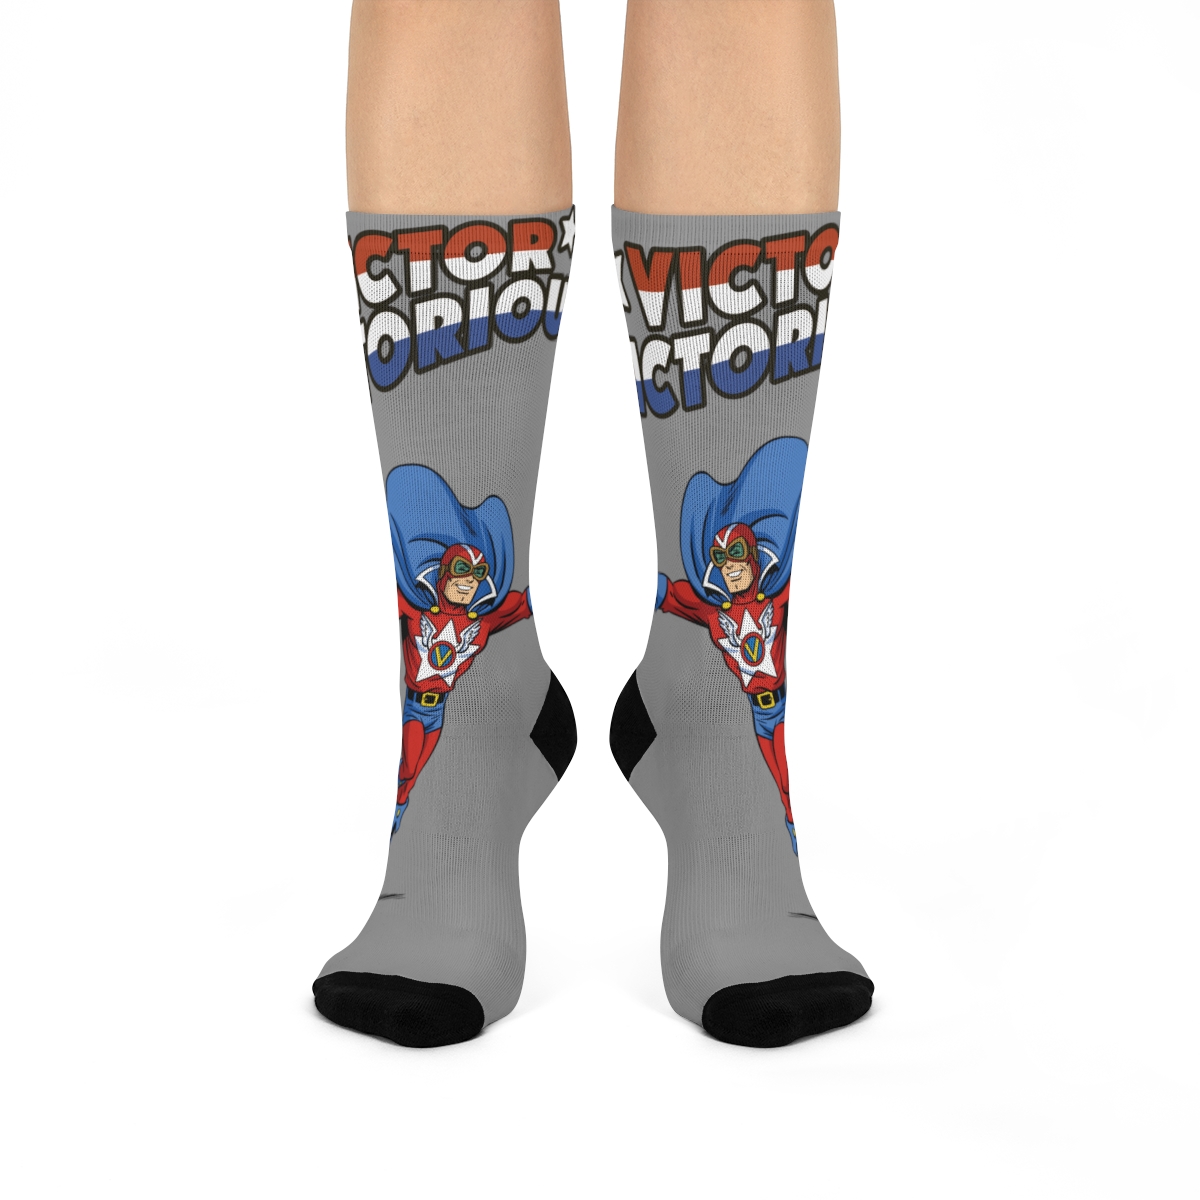 Victor Victorious Cushioned Crew Socks product thumbnail image